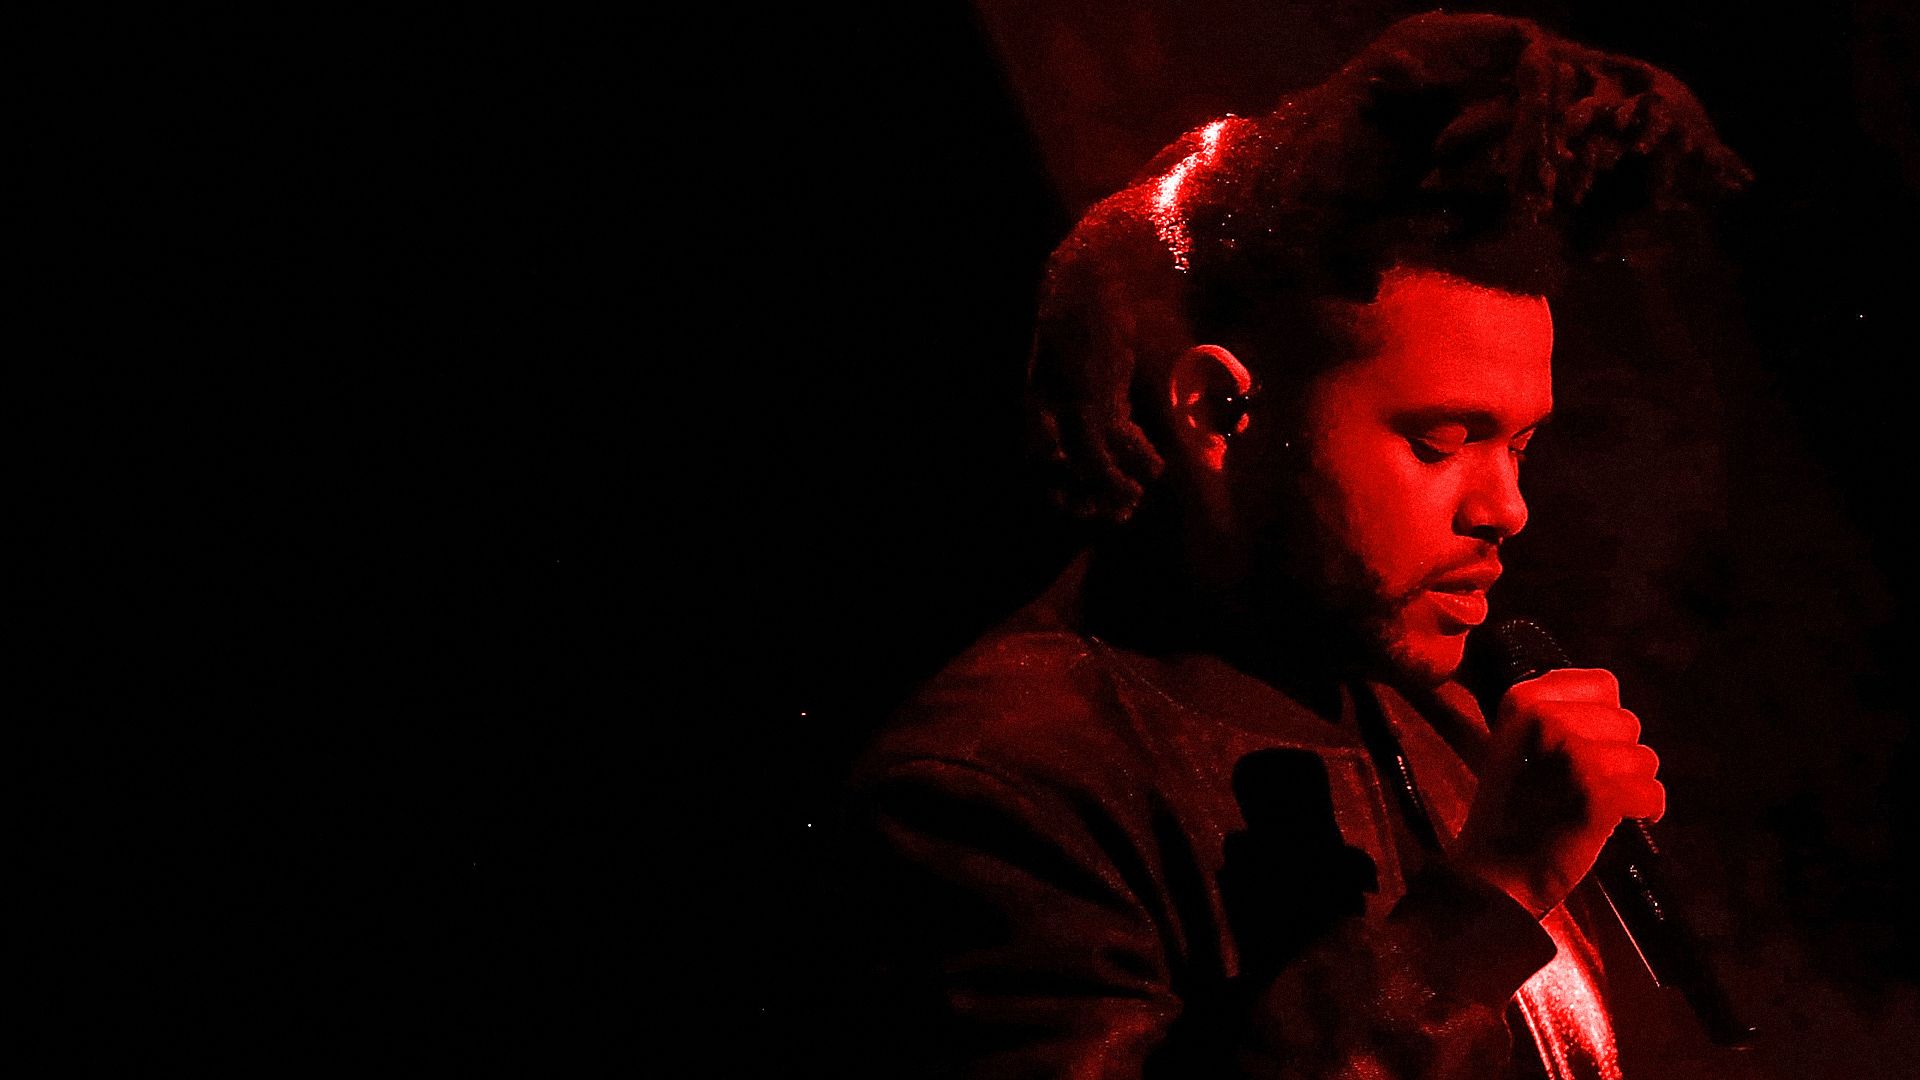 The Weeknd is a Canadian singer, songwriter, and record producer. He was born on October 18, 1990, in Toronto, Canada. He is known for his soulful voice and distinctive style, which has earned him numerous awards and accolades. He is also known for his successful music career, which includes hit songs such as 